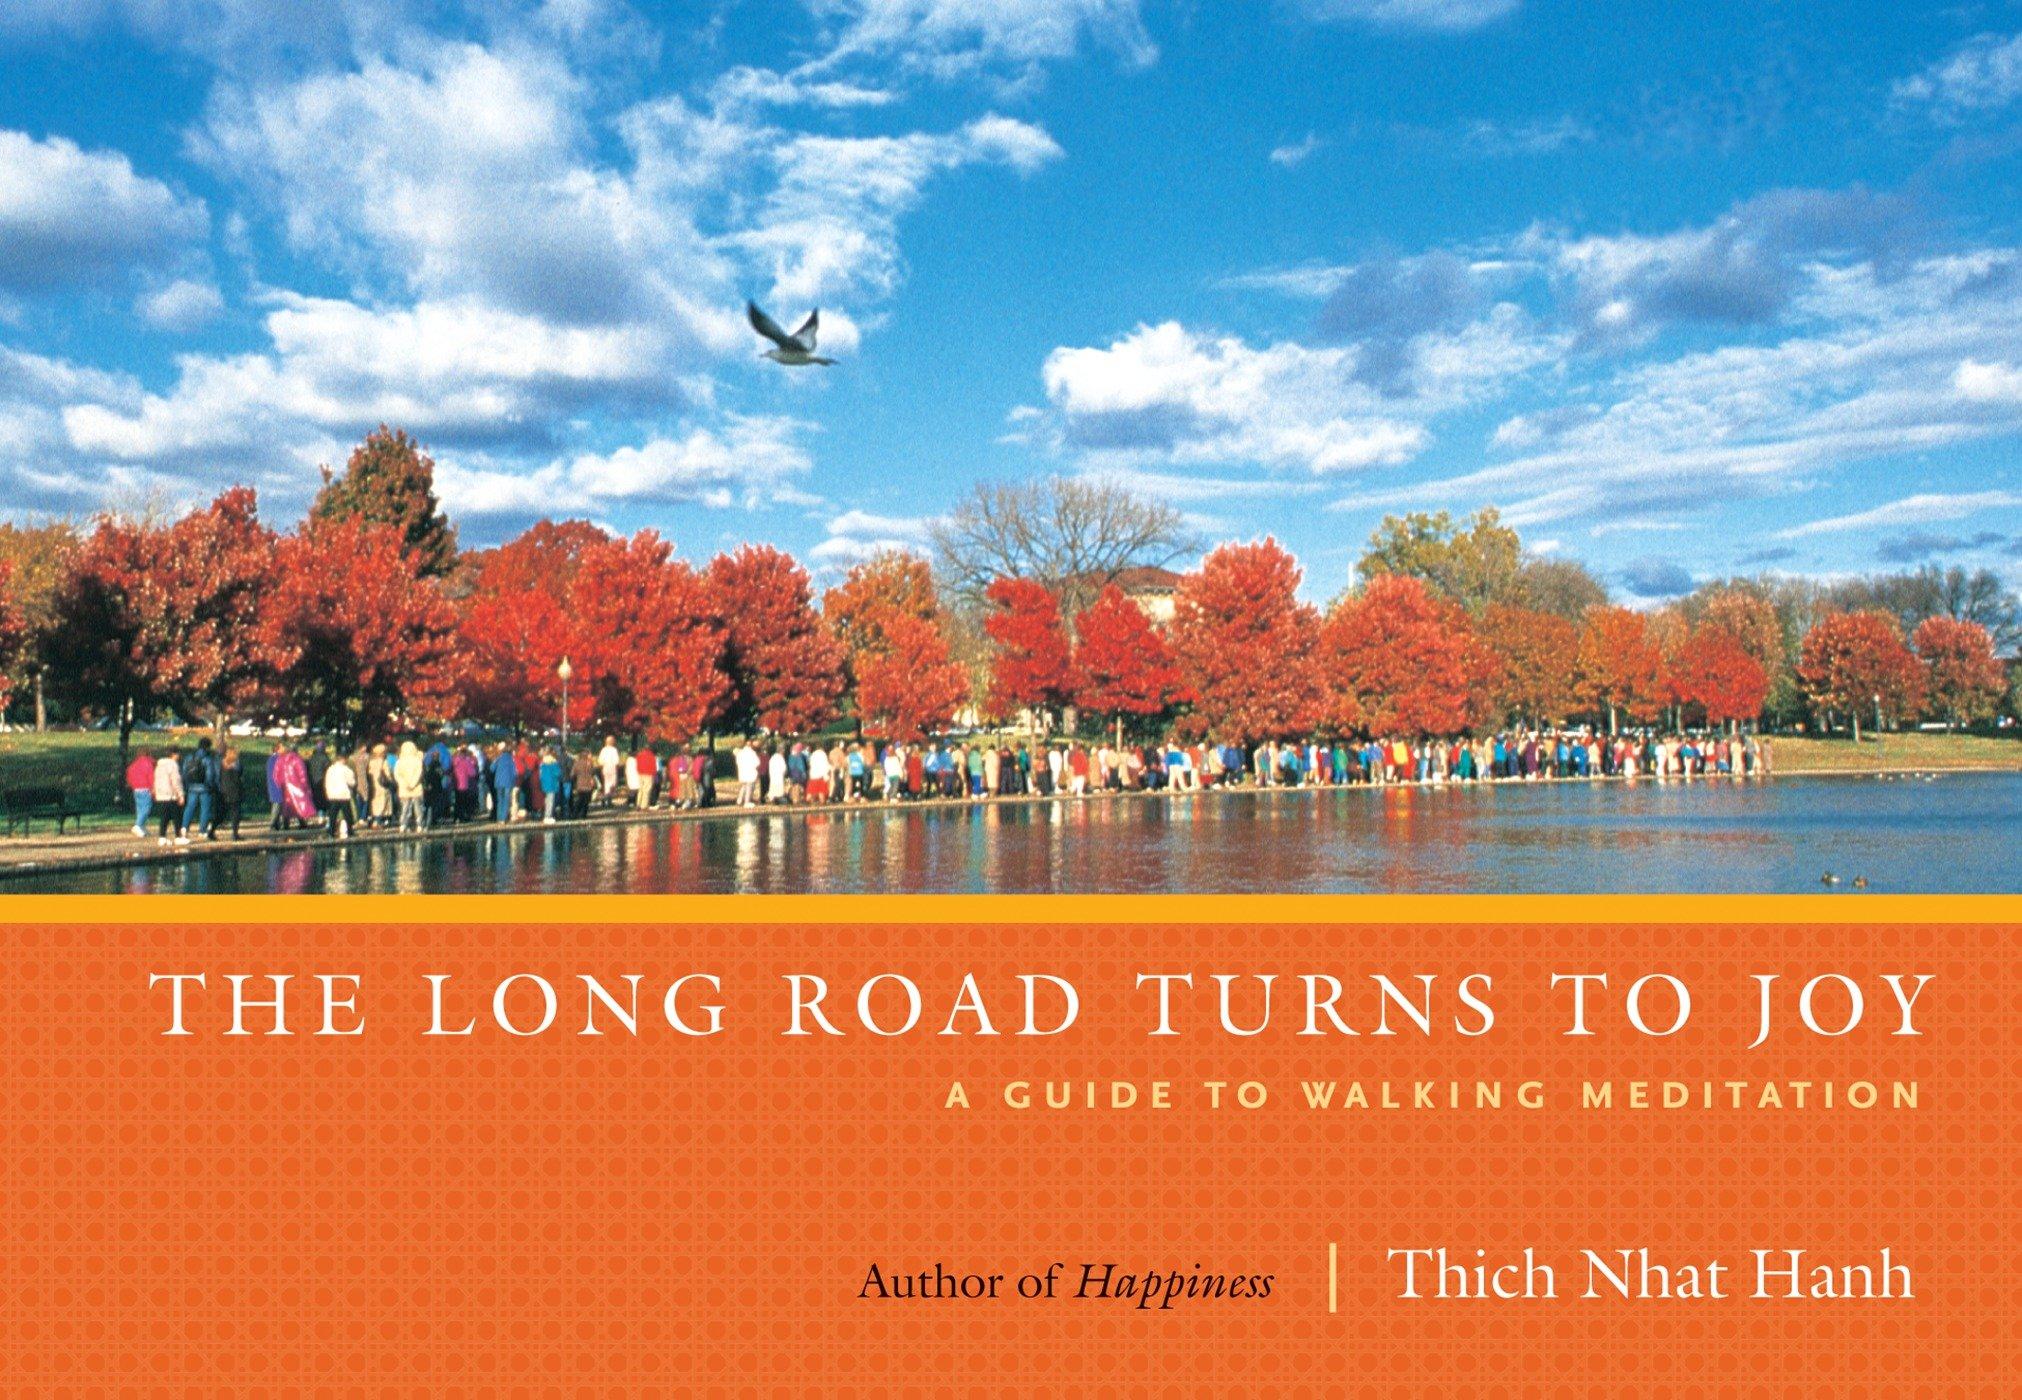 The Long Road Turns to Joy: A Guide to Walking Meditation - Thich Nhat Hanh